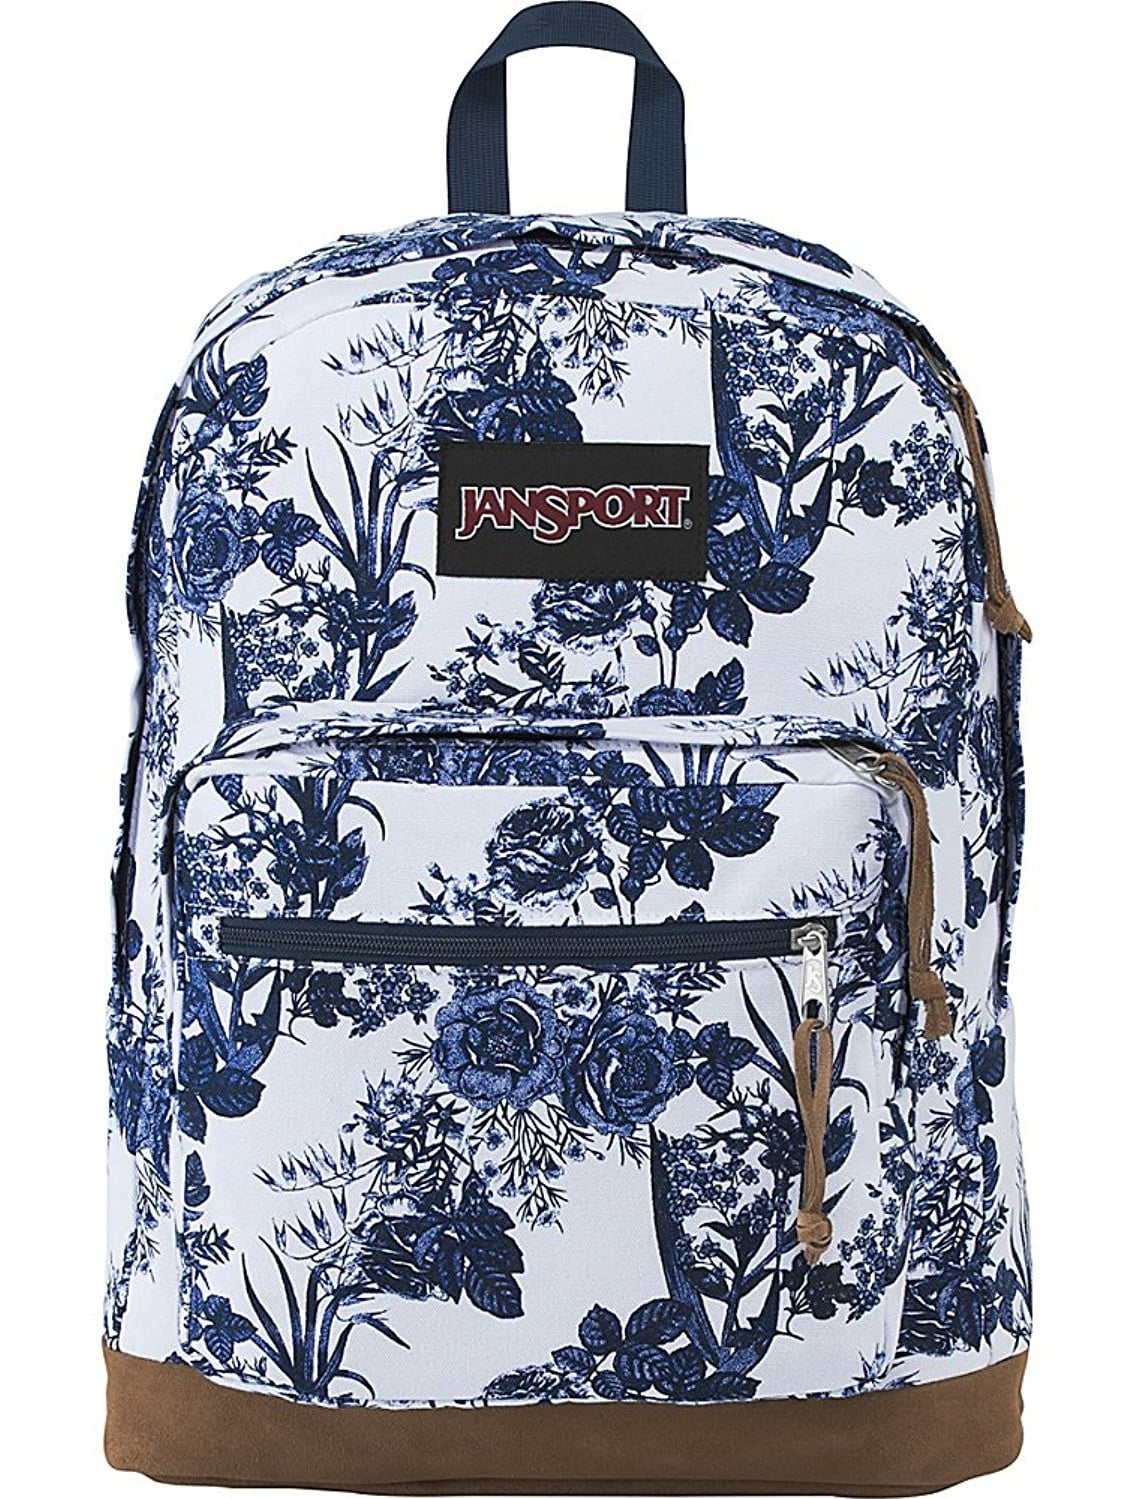 jansport right pack expressions white artist rose